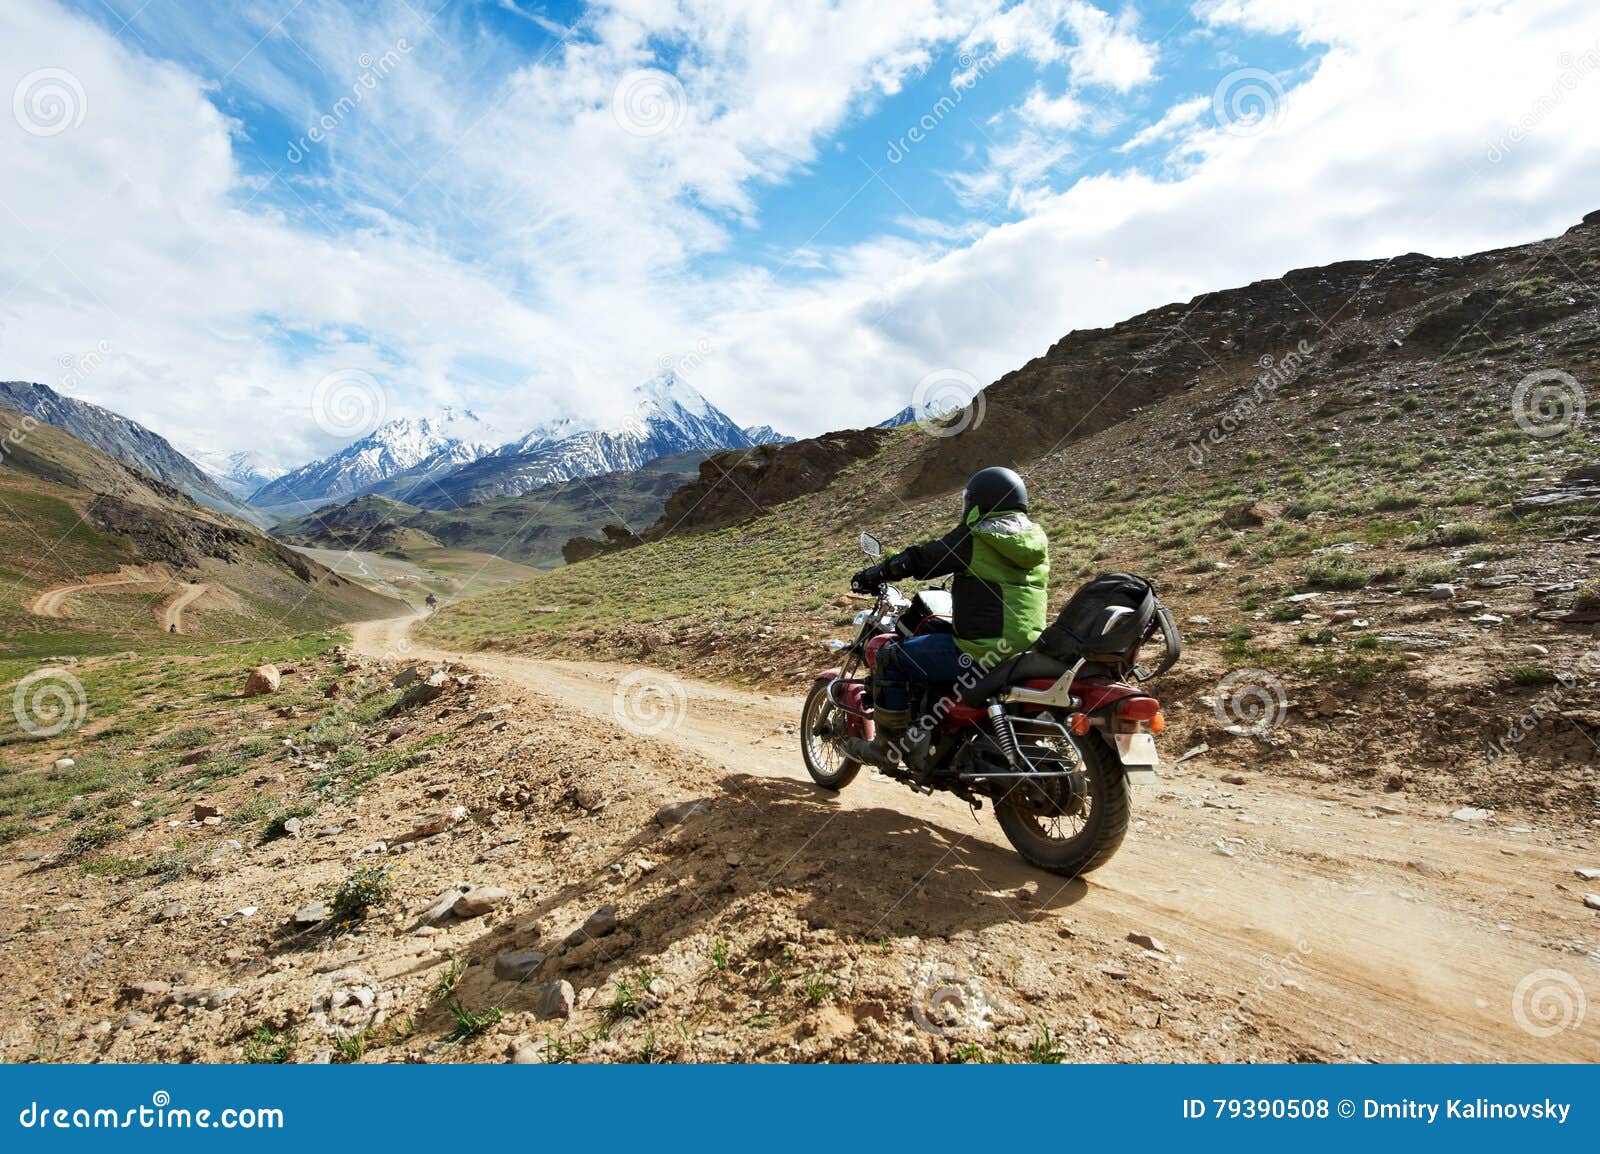 Motorbike Tourism. Traveller at Motorcycle in Mountains Stock Photo